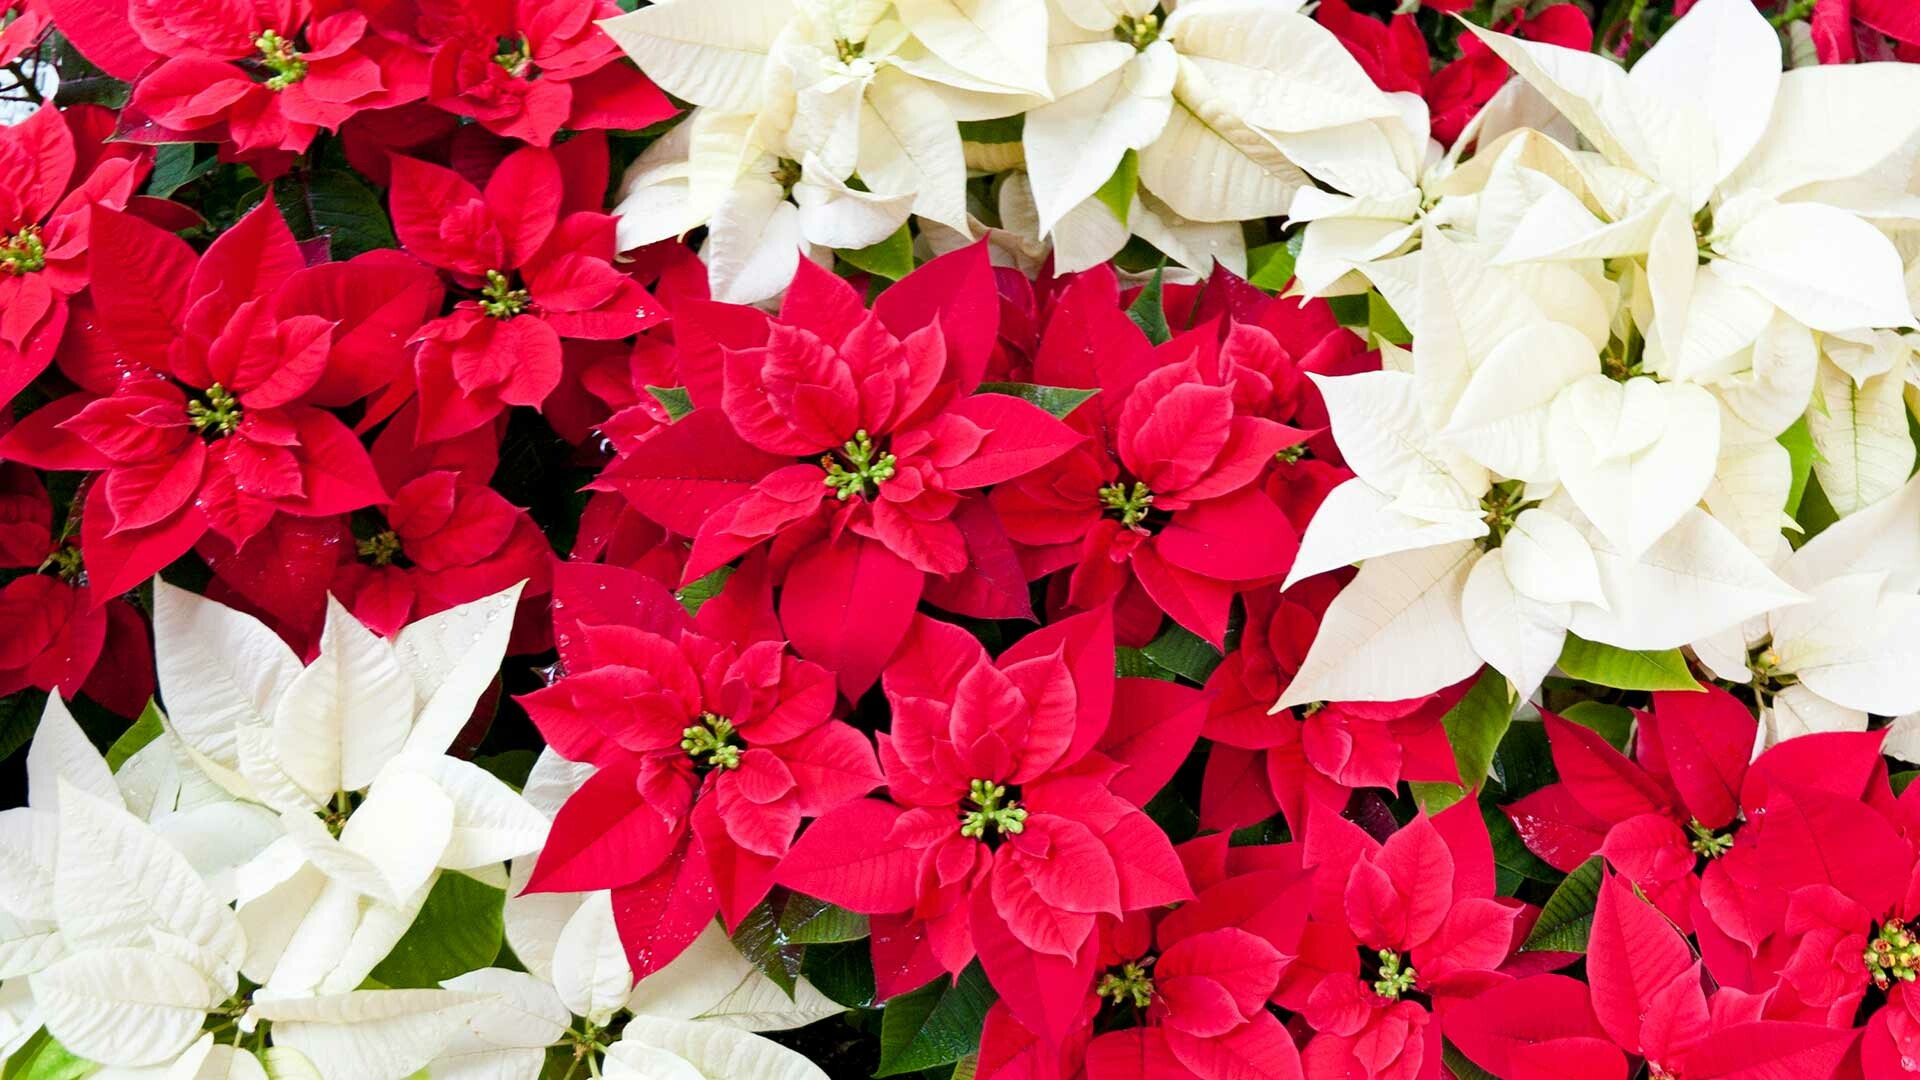 Poinsettia: The beauty of poinsettias can persist from Thanksgiving through Christmas, and sometimes even to Valentine's Day. 1920x1080 Full HD Wallpaper.